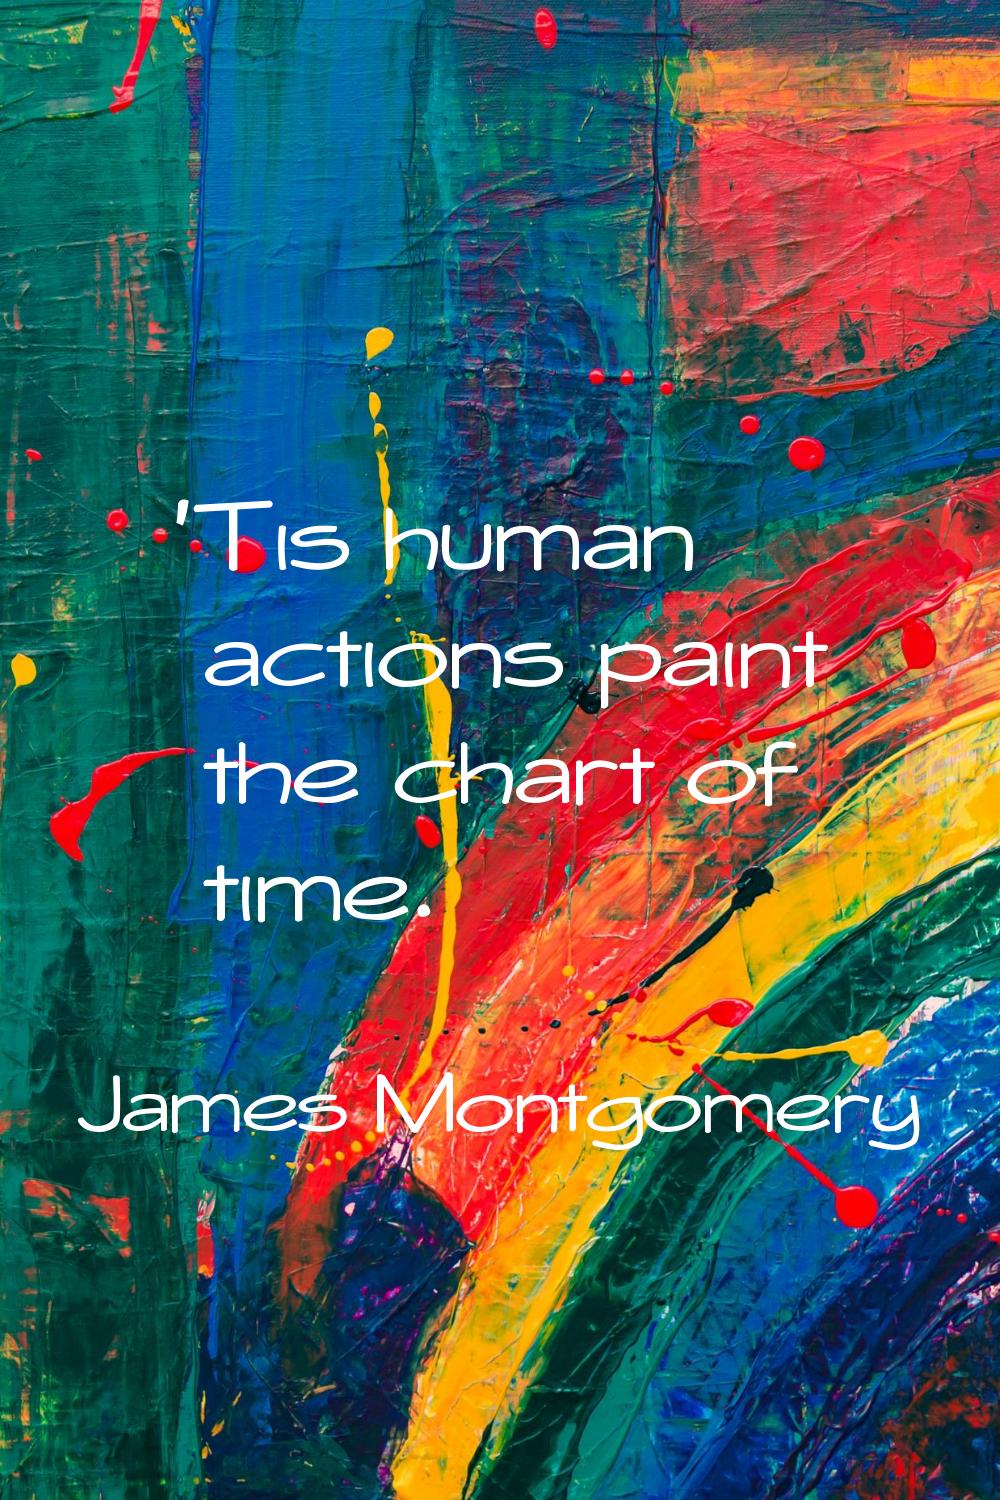 'Tis human actions paint the chart of time.